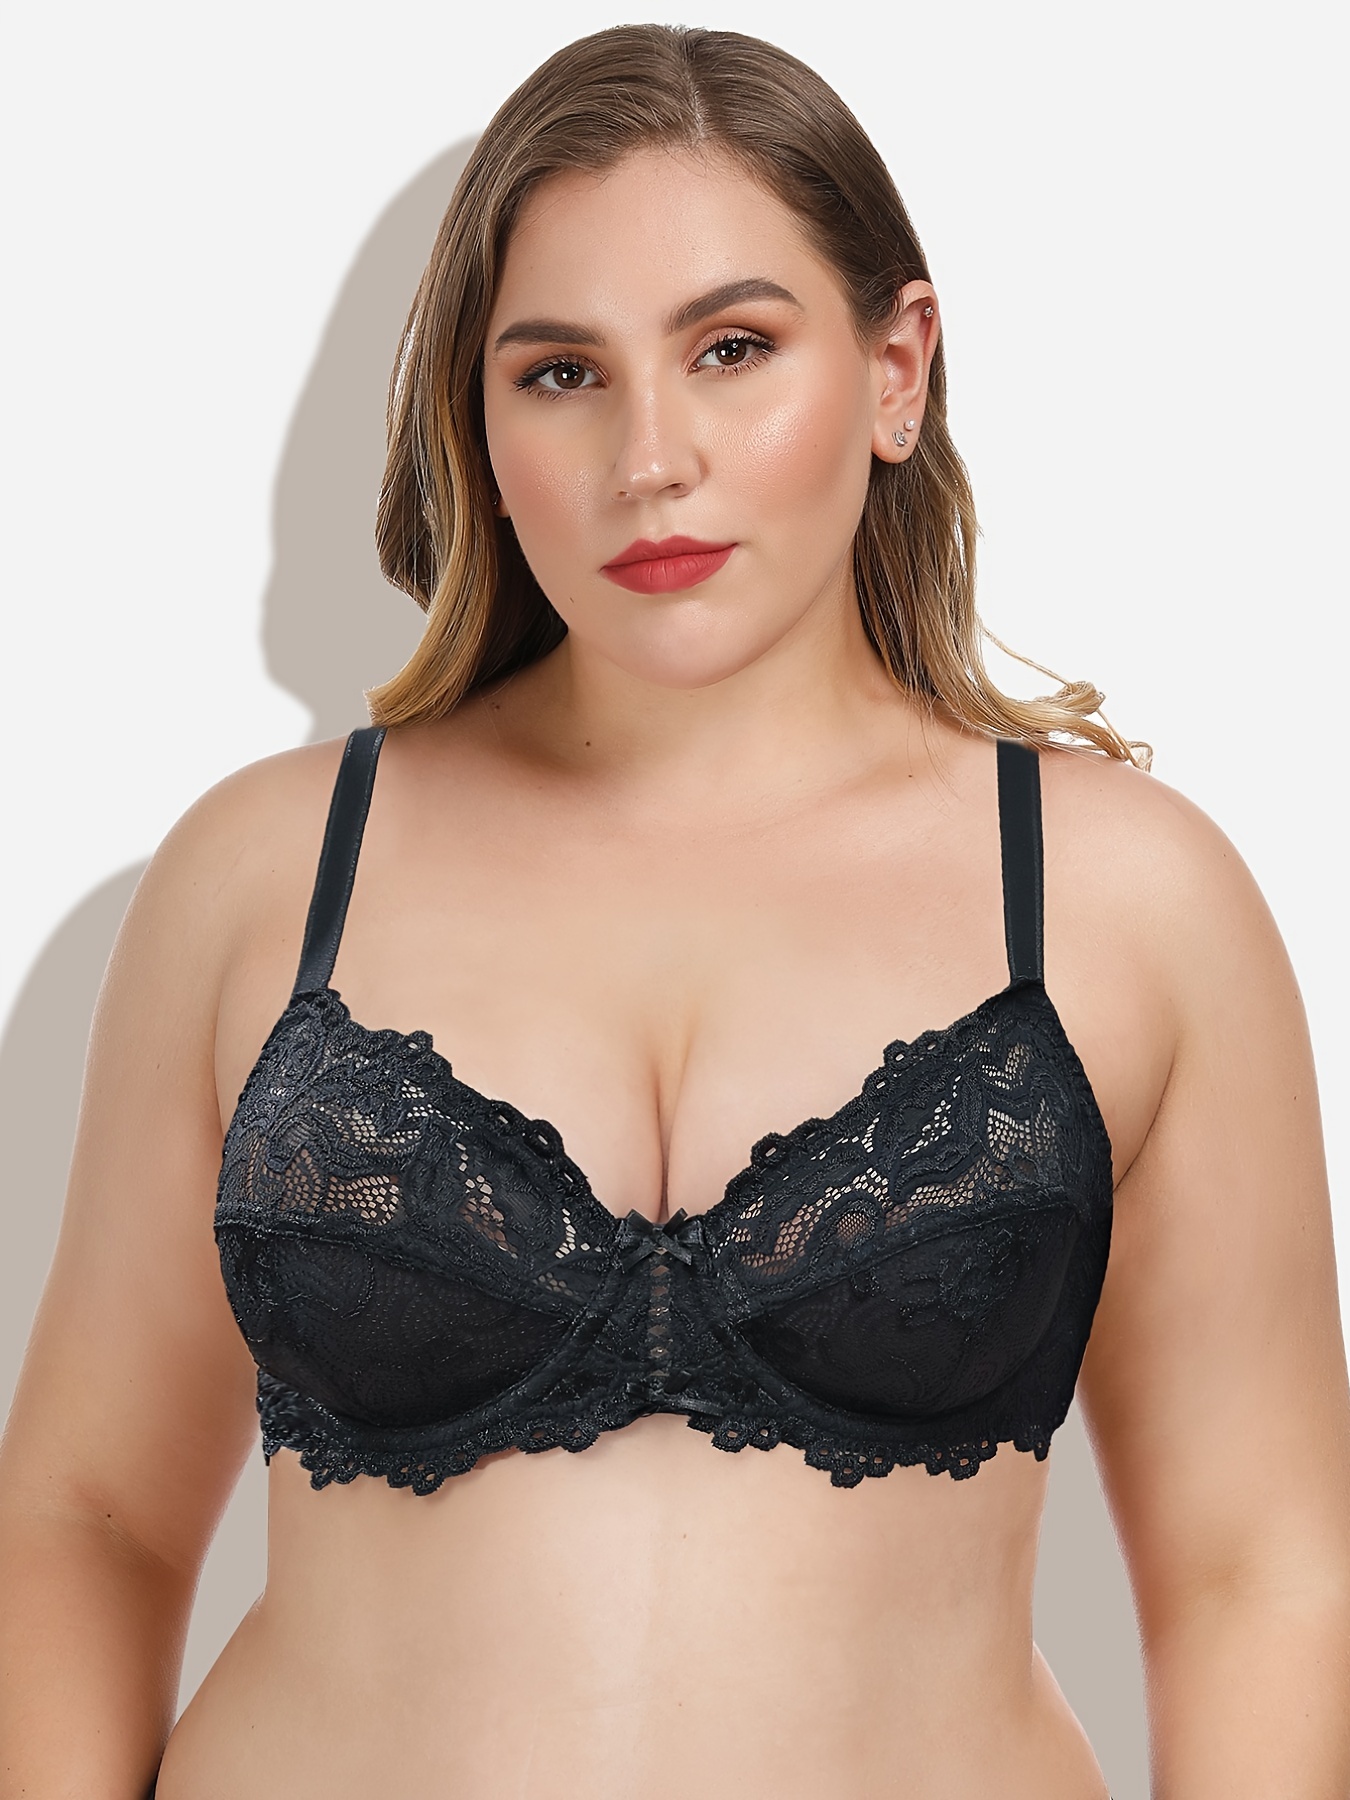 Plus Size Womens Underwire Lace Brallete Lace Bra 32J, 32C, 33D, 34E, 42F,  And 32H Series Lingerie Underwear 46I 42I From Liulaolao, $24.12